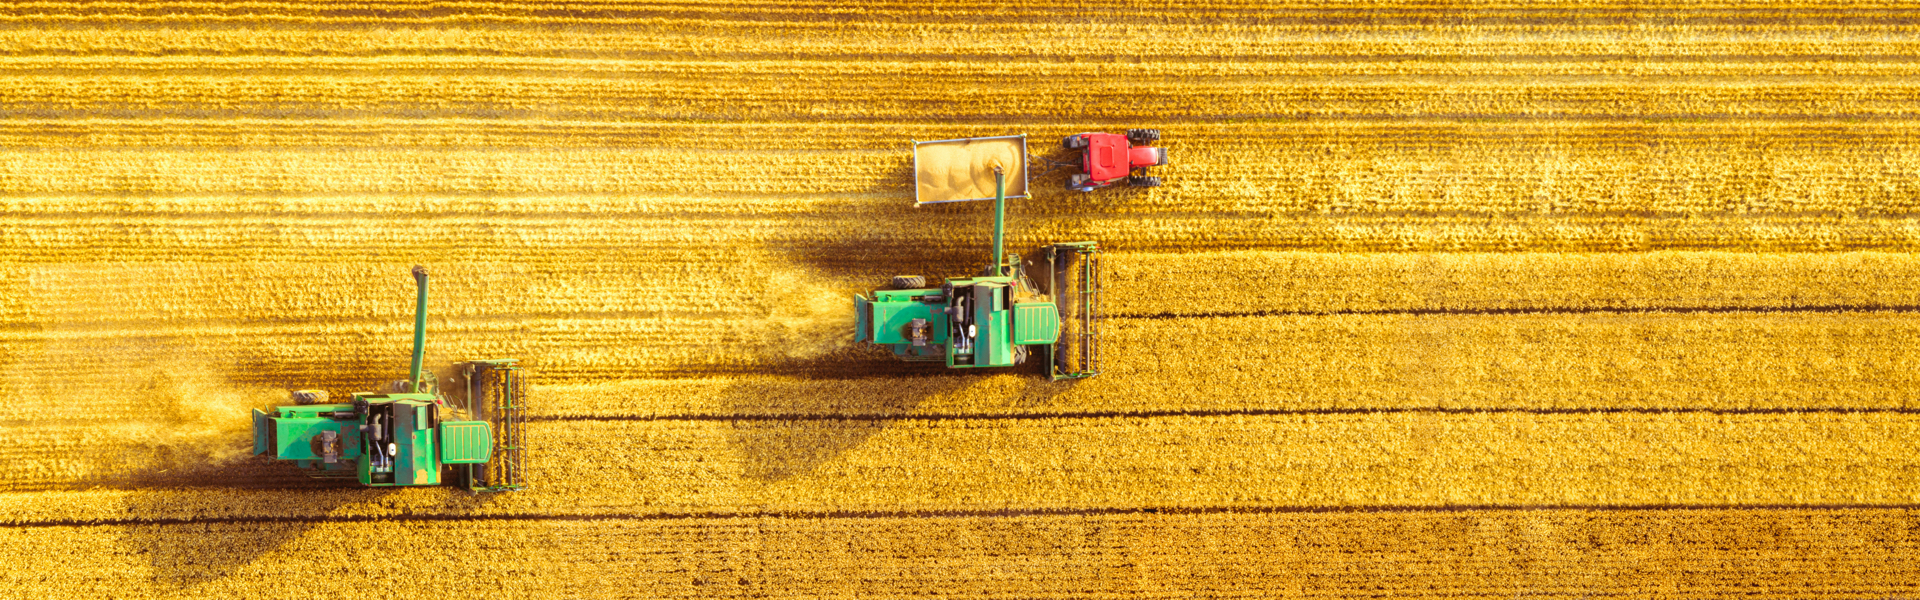 Two tractors are harvesting wheat in a field.